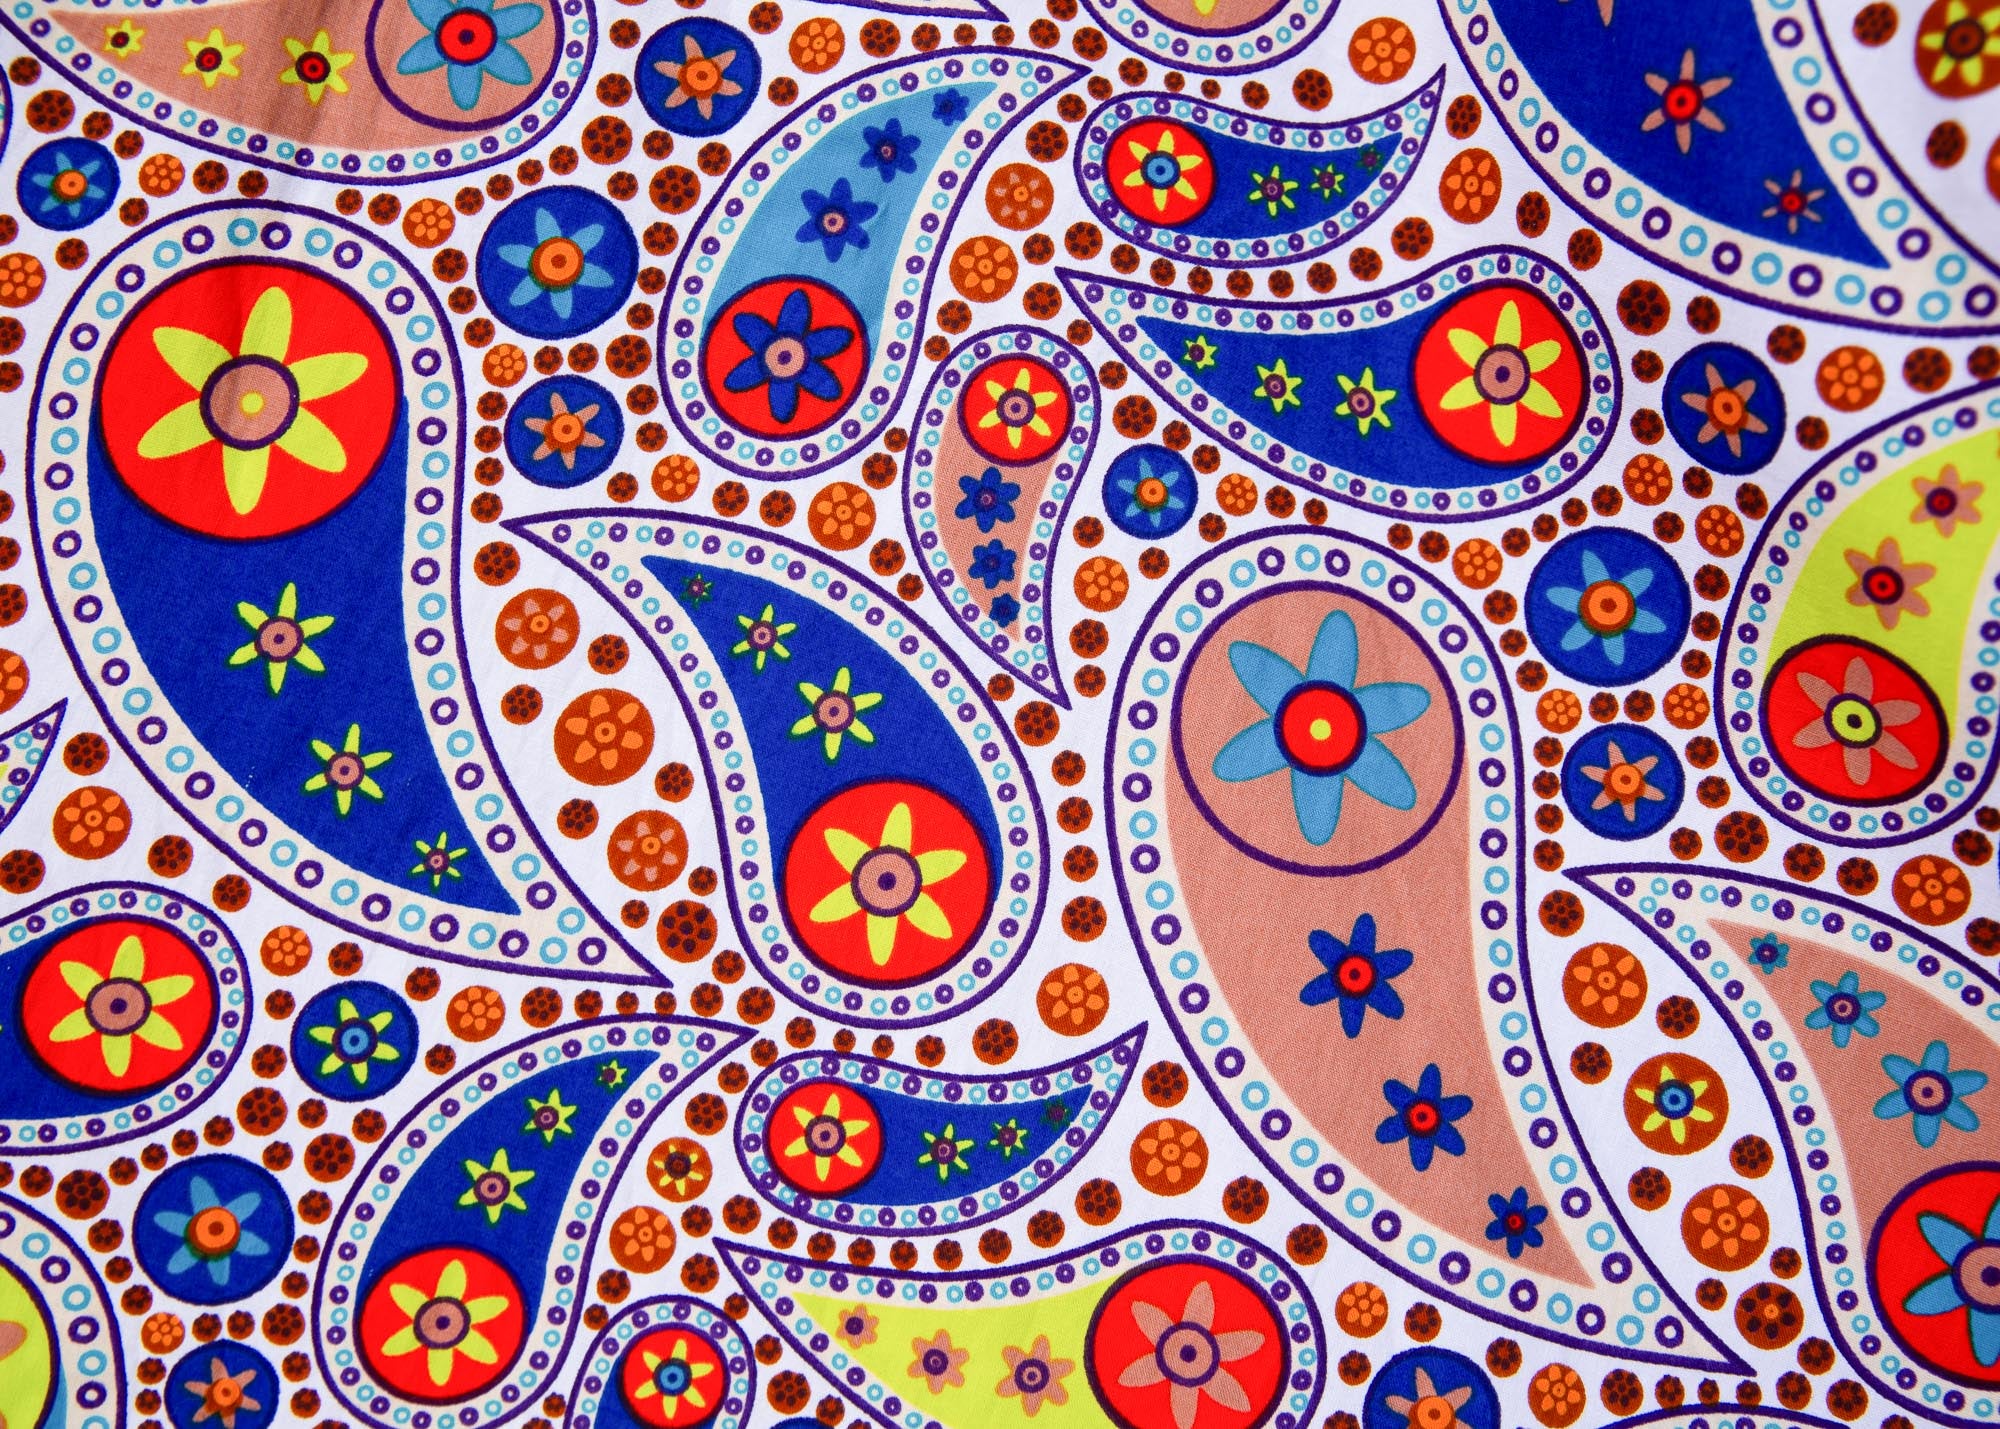 Close up display of multi-colored paisley print dress